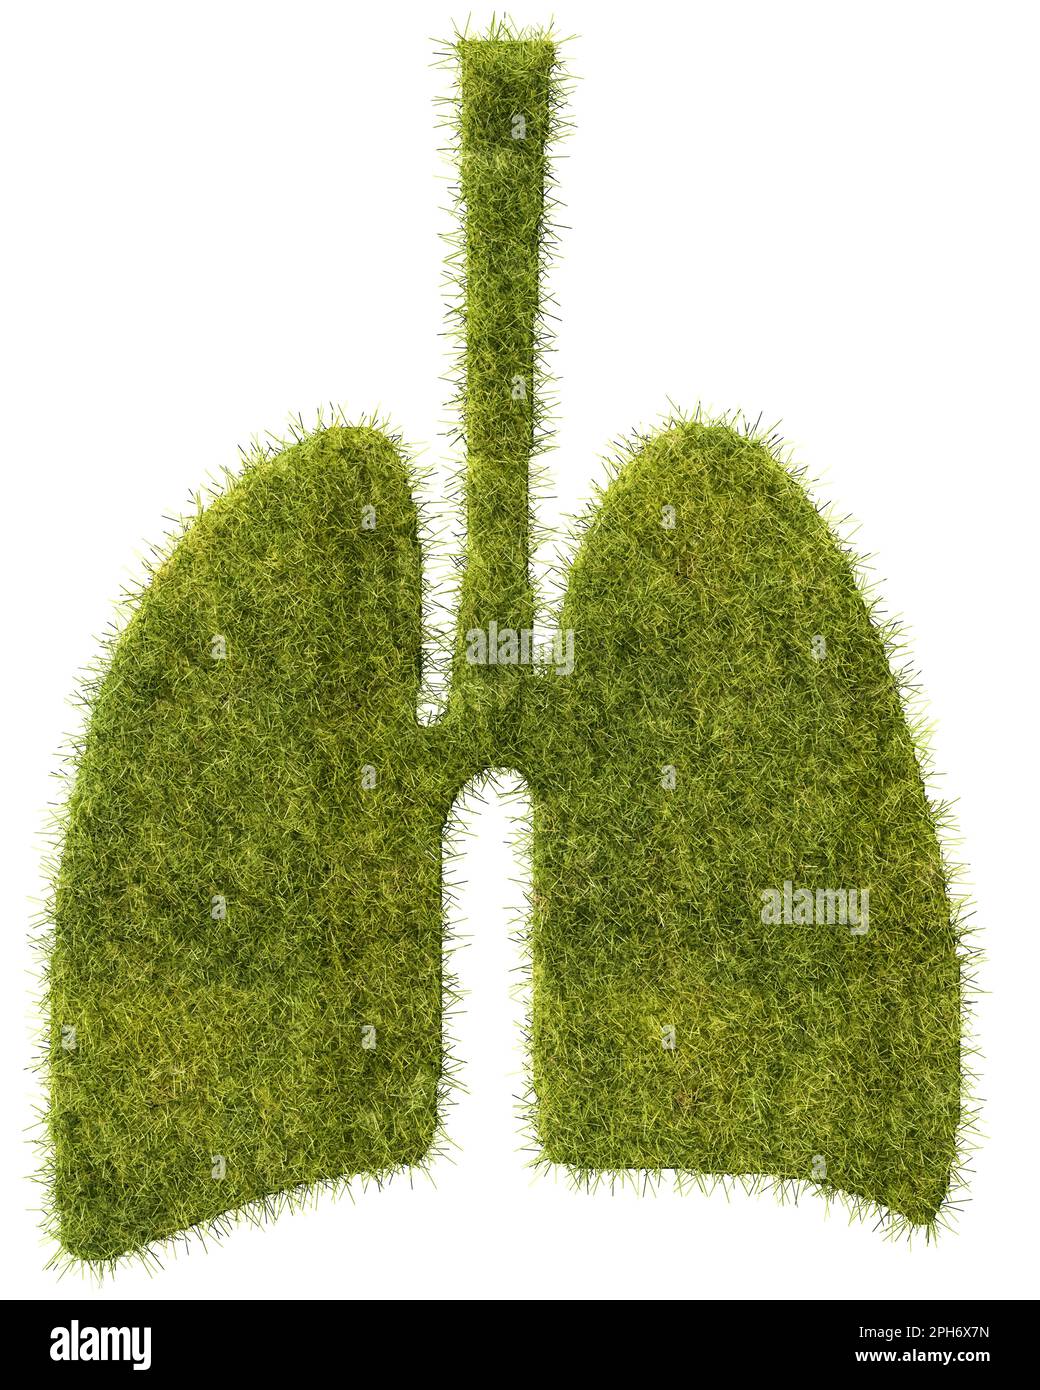 Green lung concept. A patch of grass in the form of a human lung. Isolated on white background Stock Photo